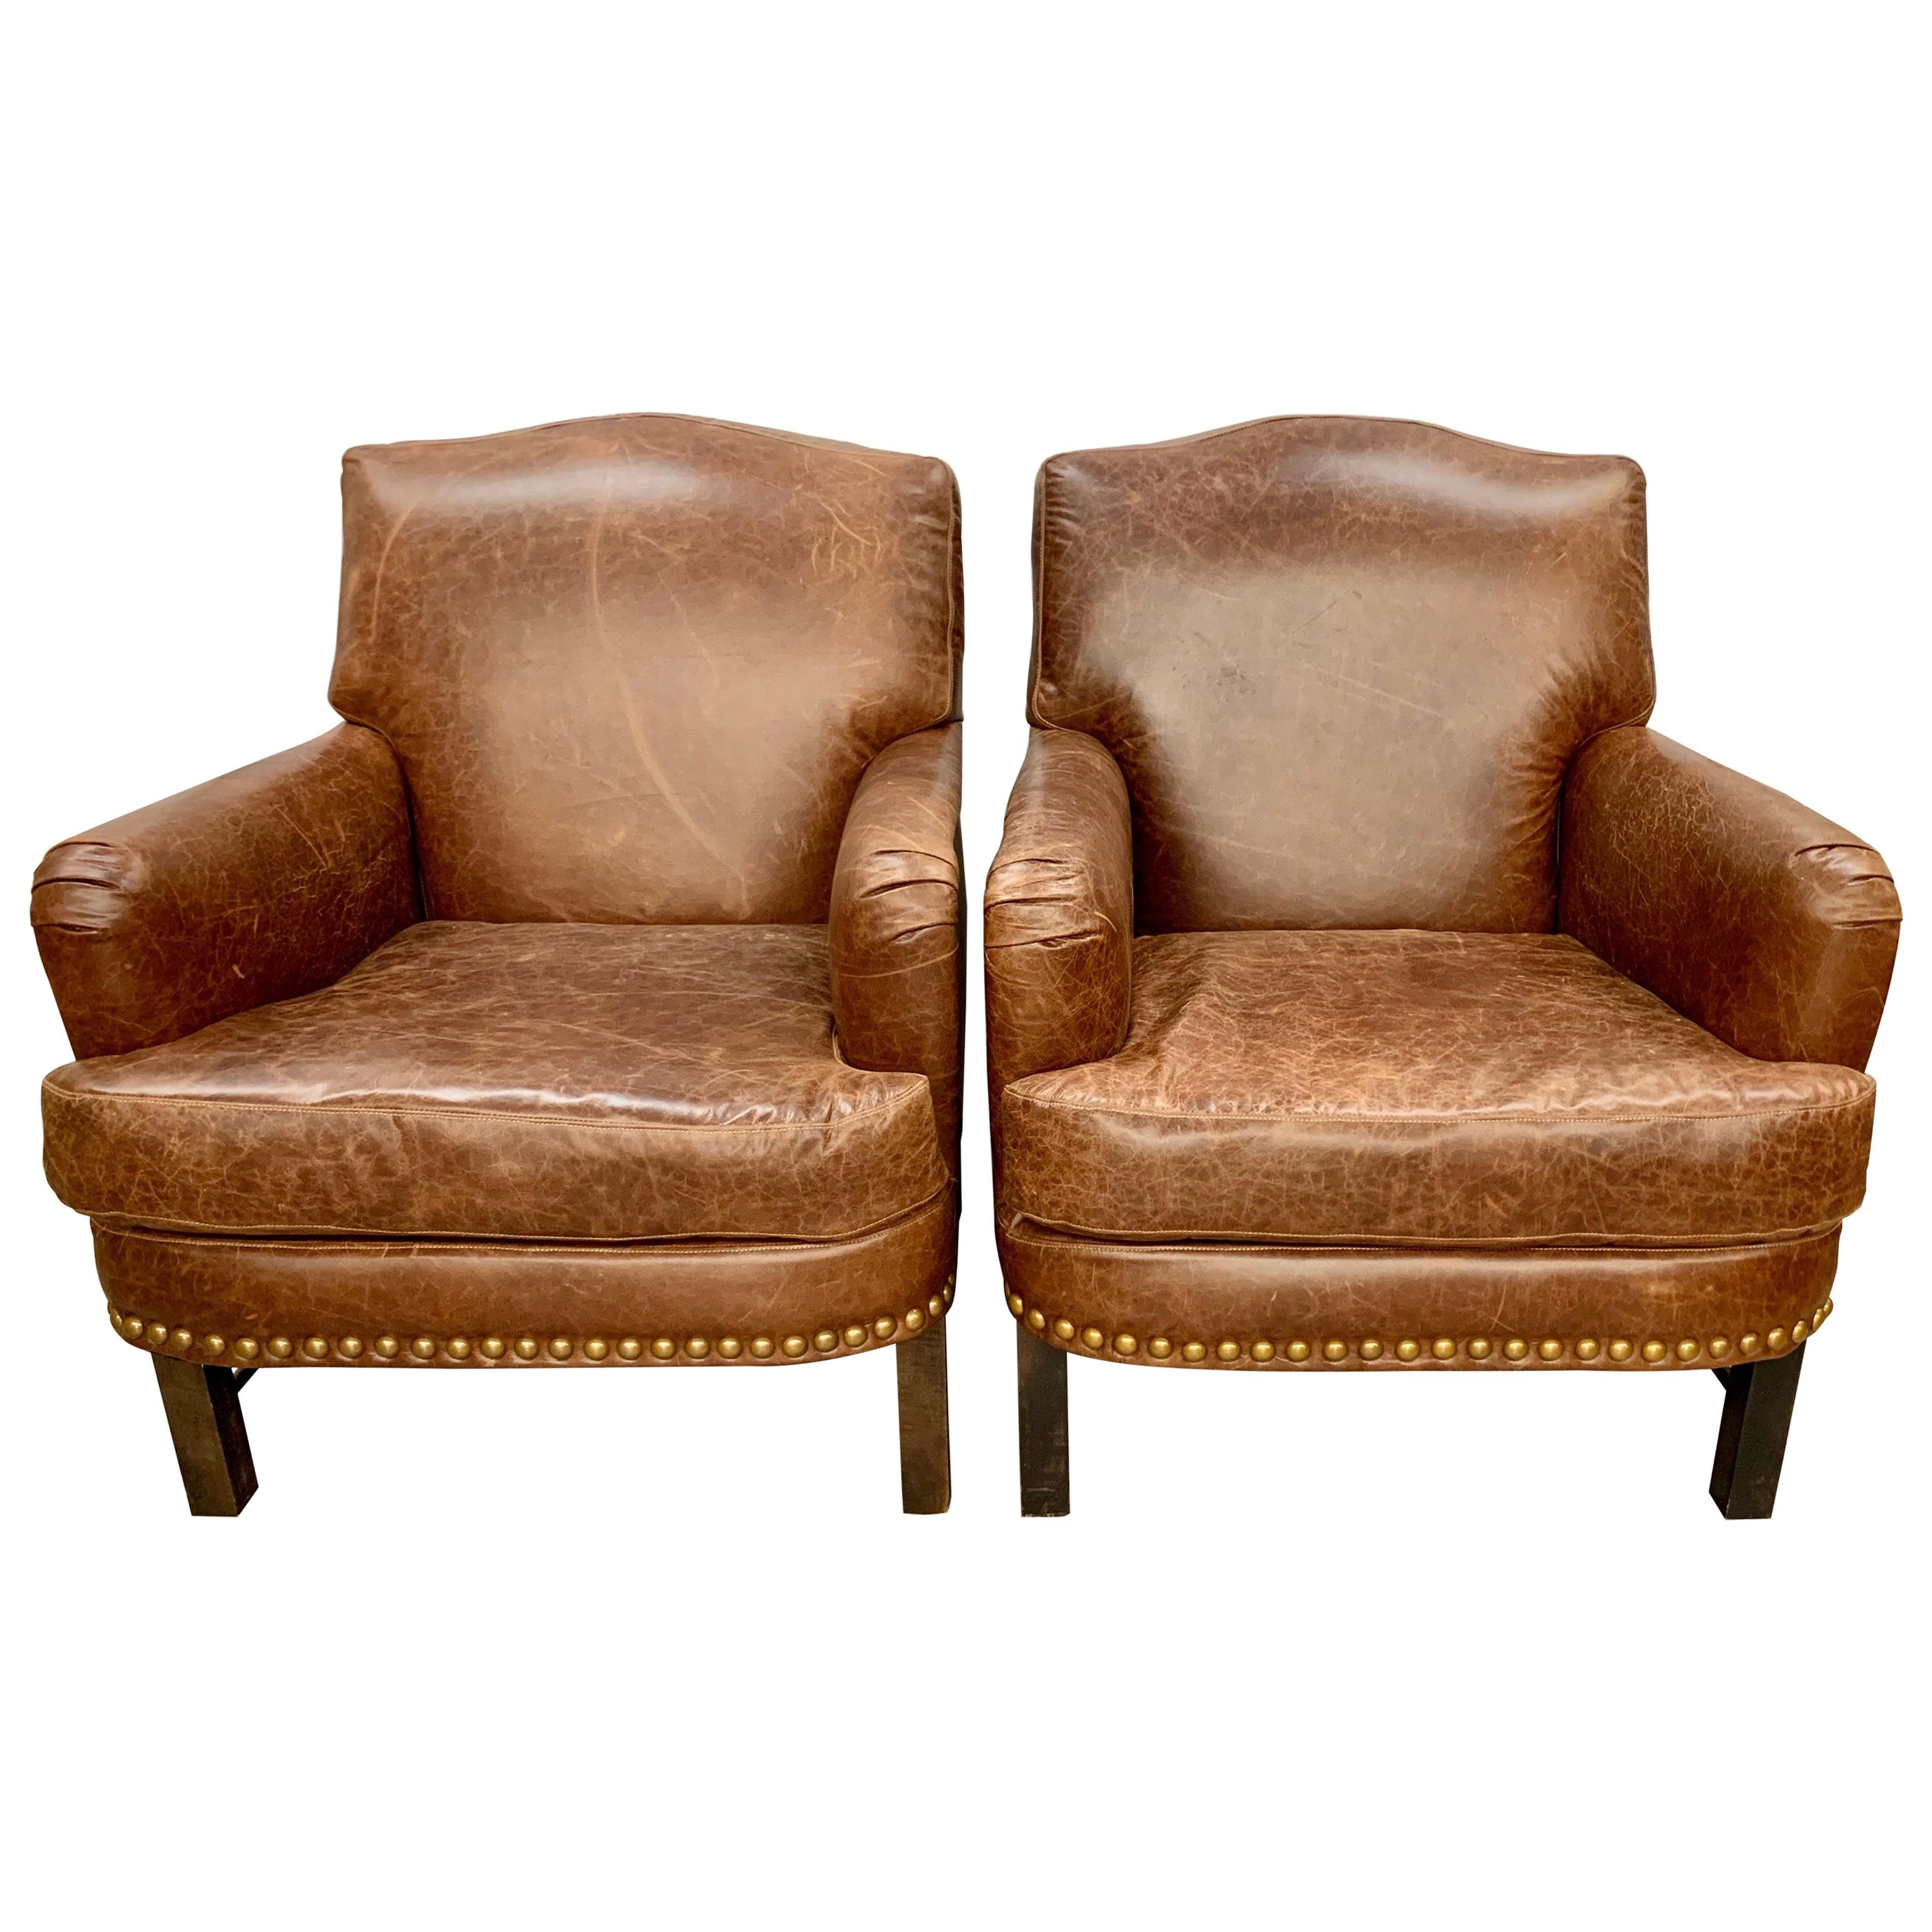 Set of Four Matching Brown Leather Nailhead Club Chairs